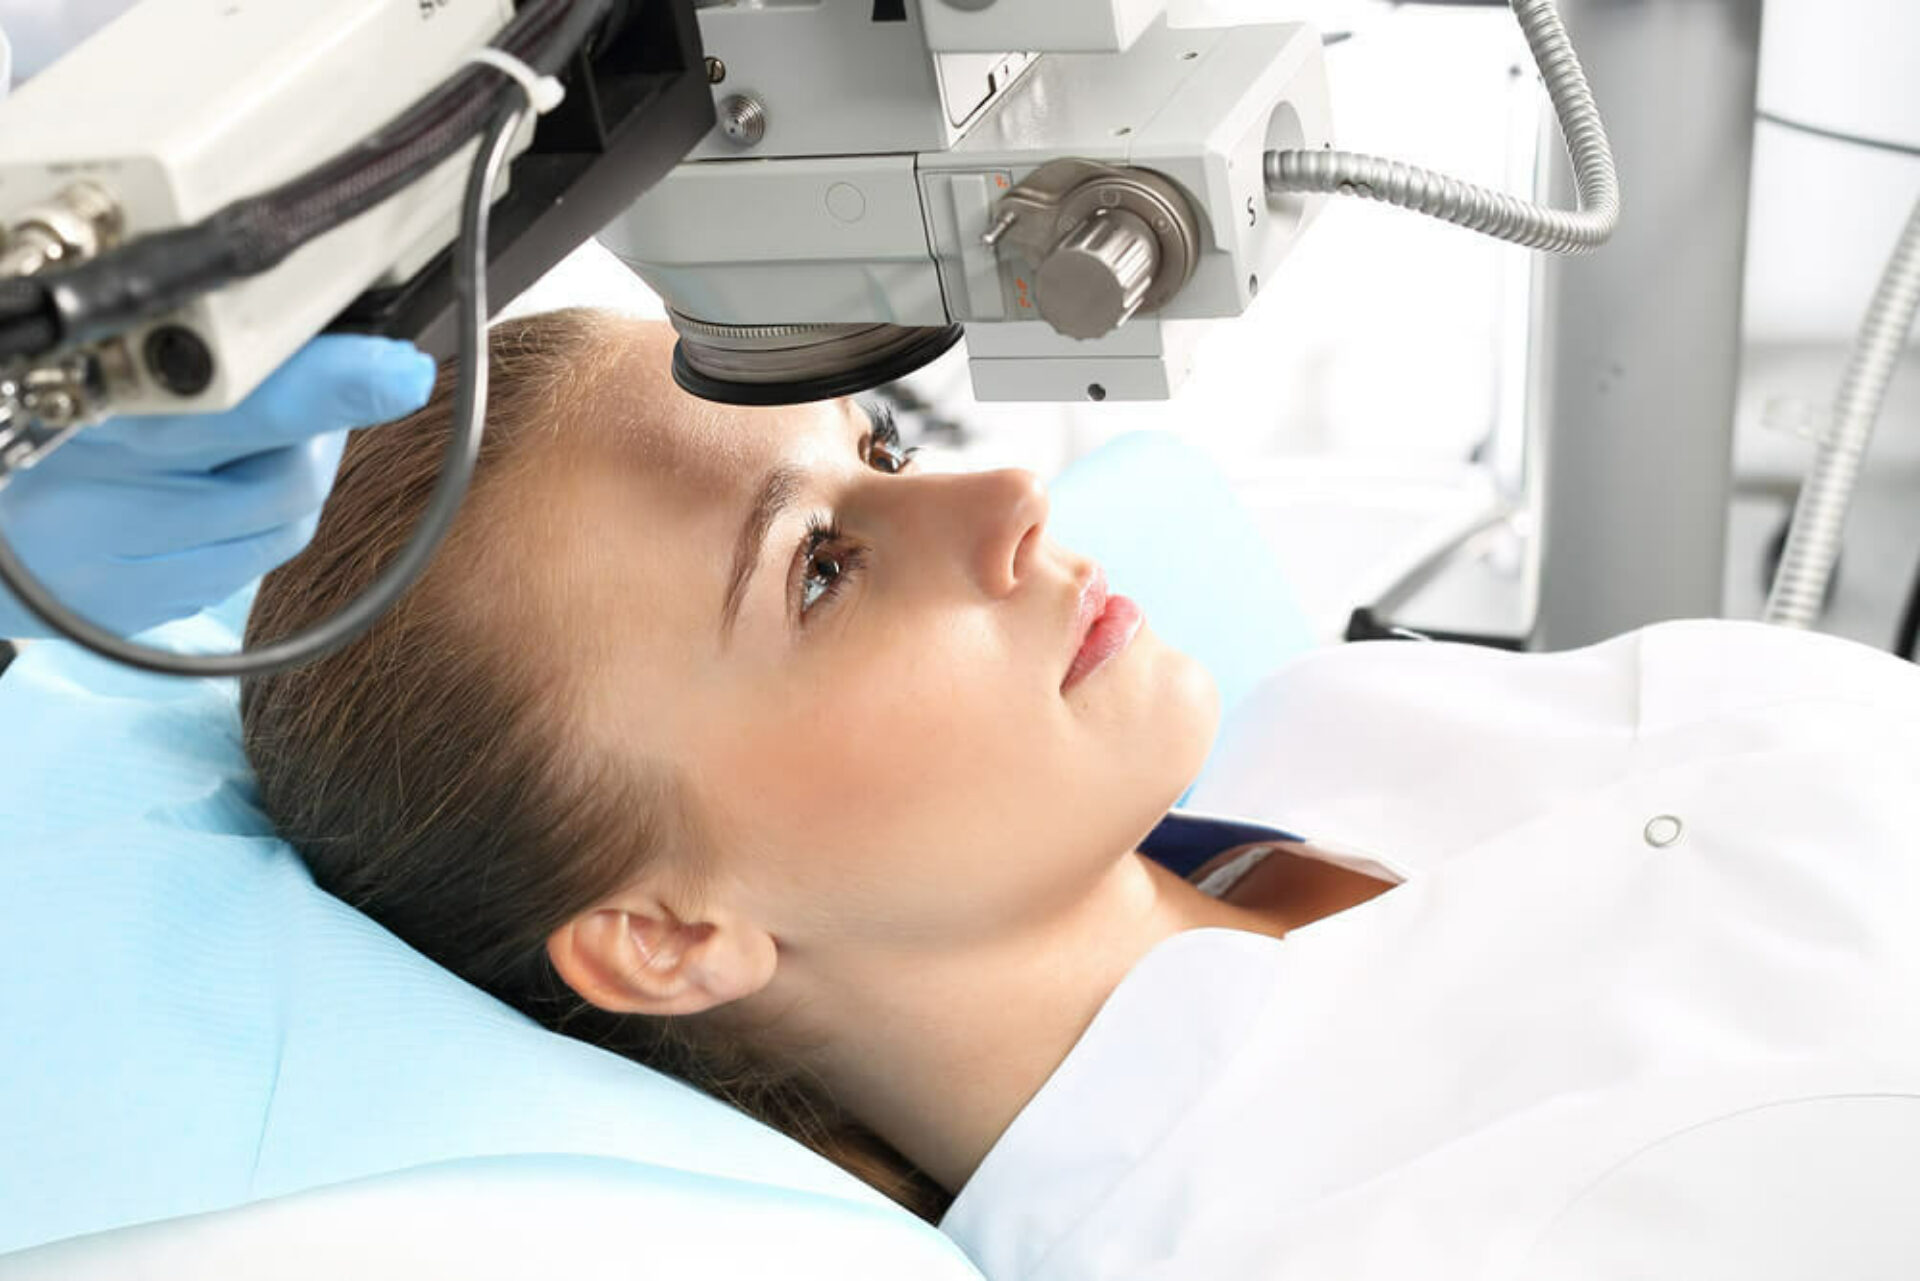 How Much Is Lasik Surgery Without Insurance?